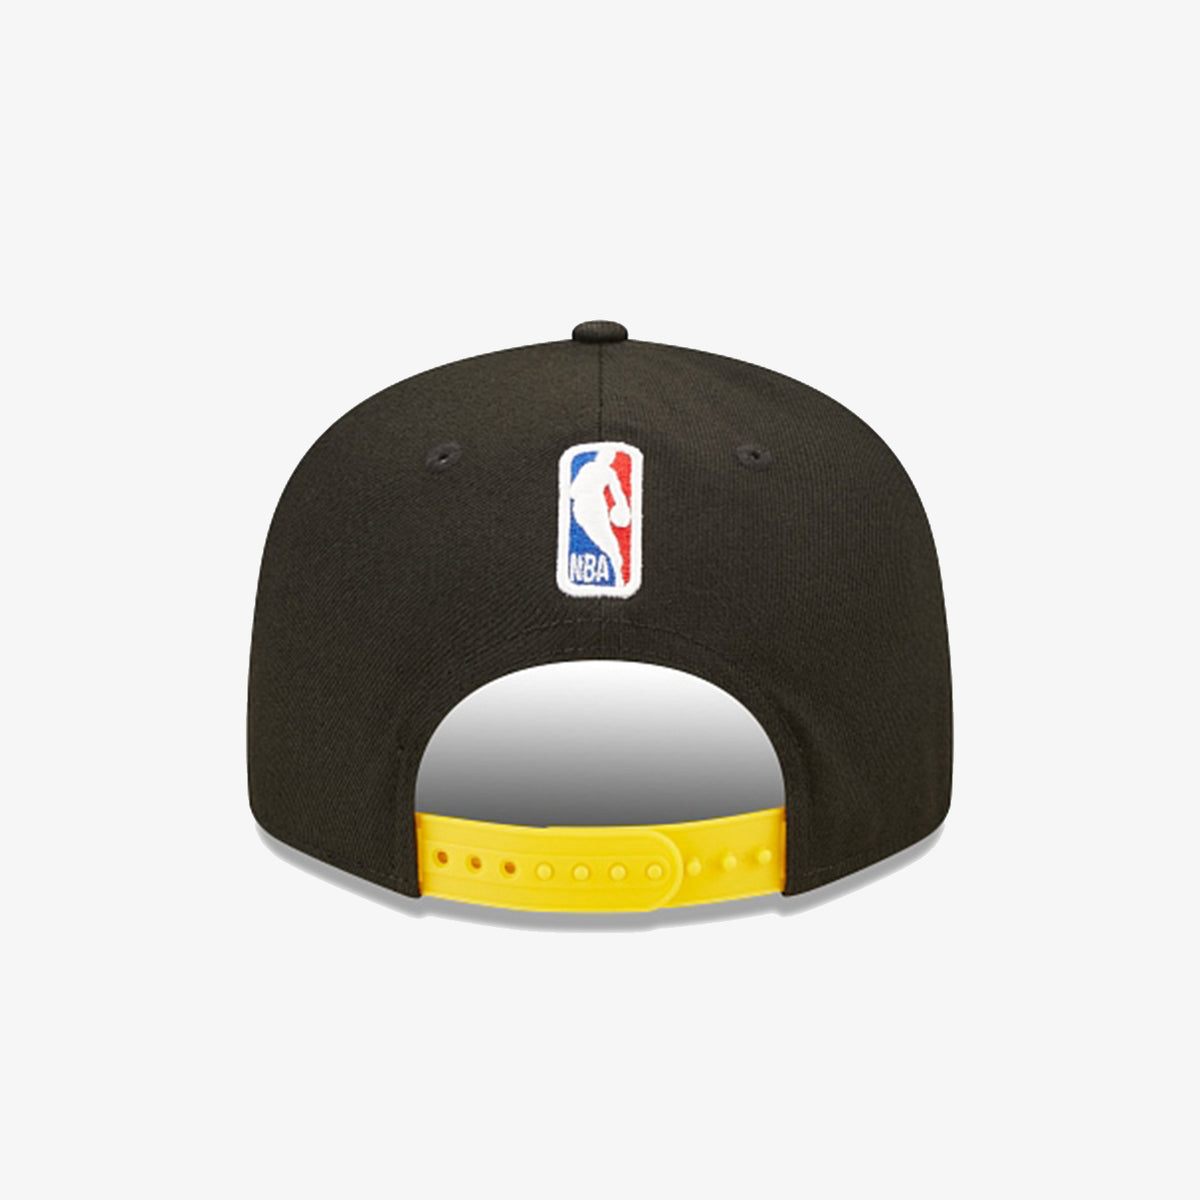 Golden State Warriors 9Fifty City Edition Snapback